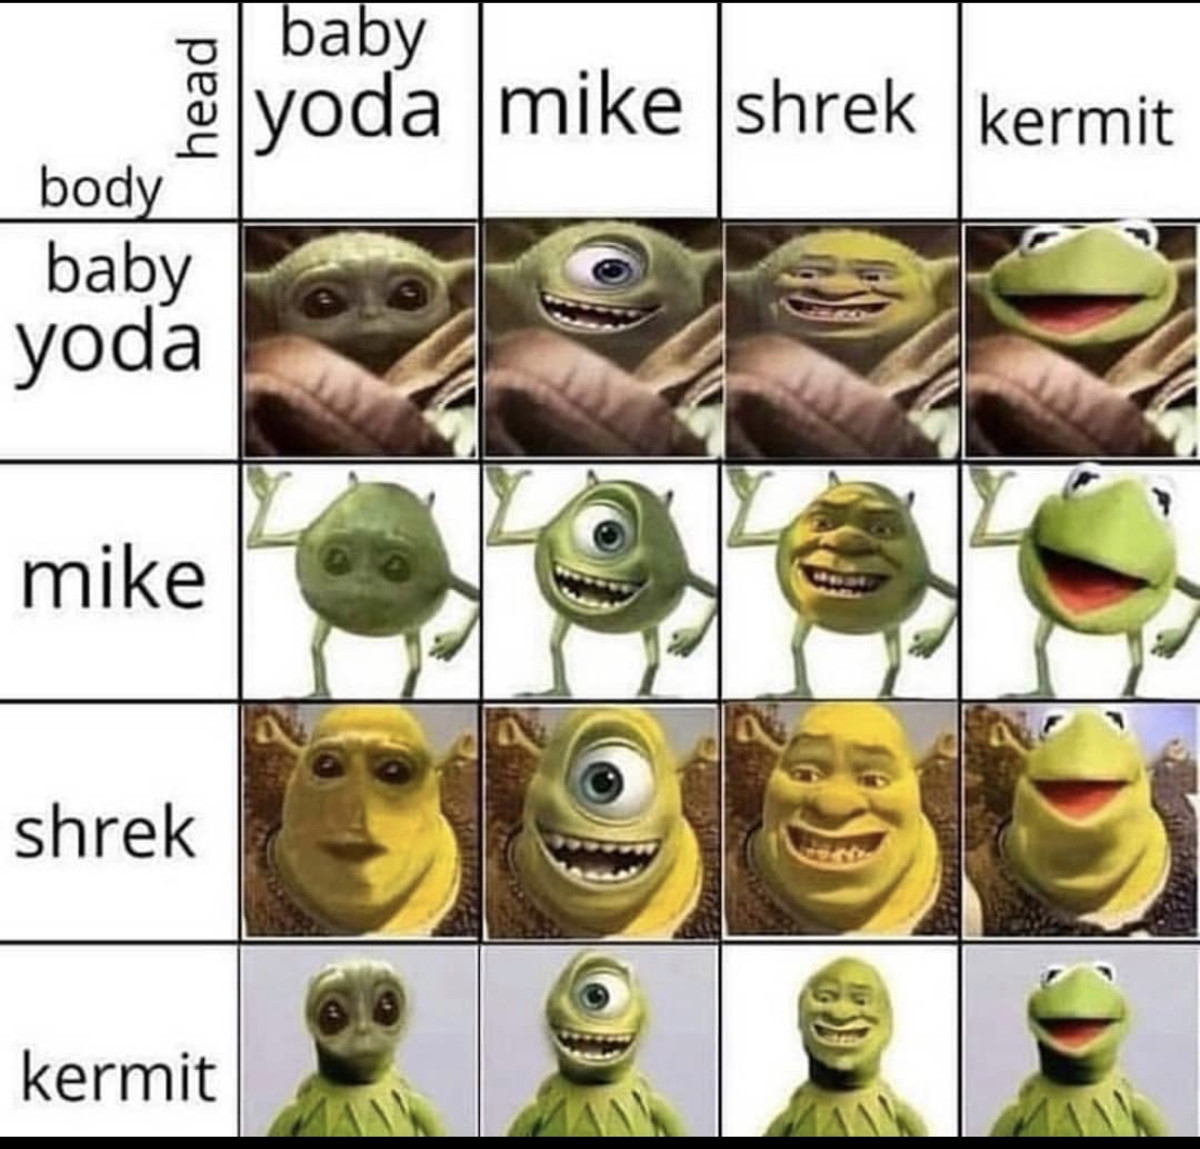 Shrek Mike uses a different face than the other Shreks. executable Nutjobs....